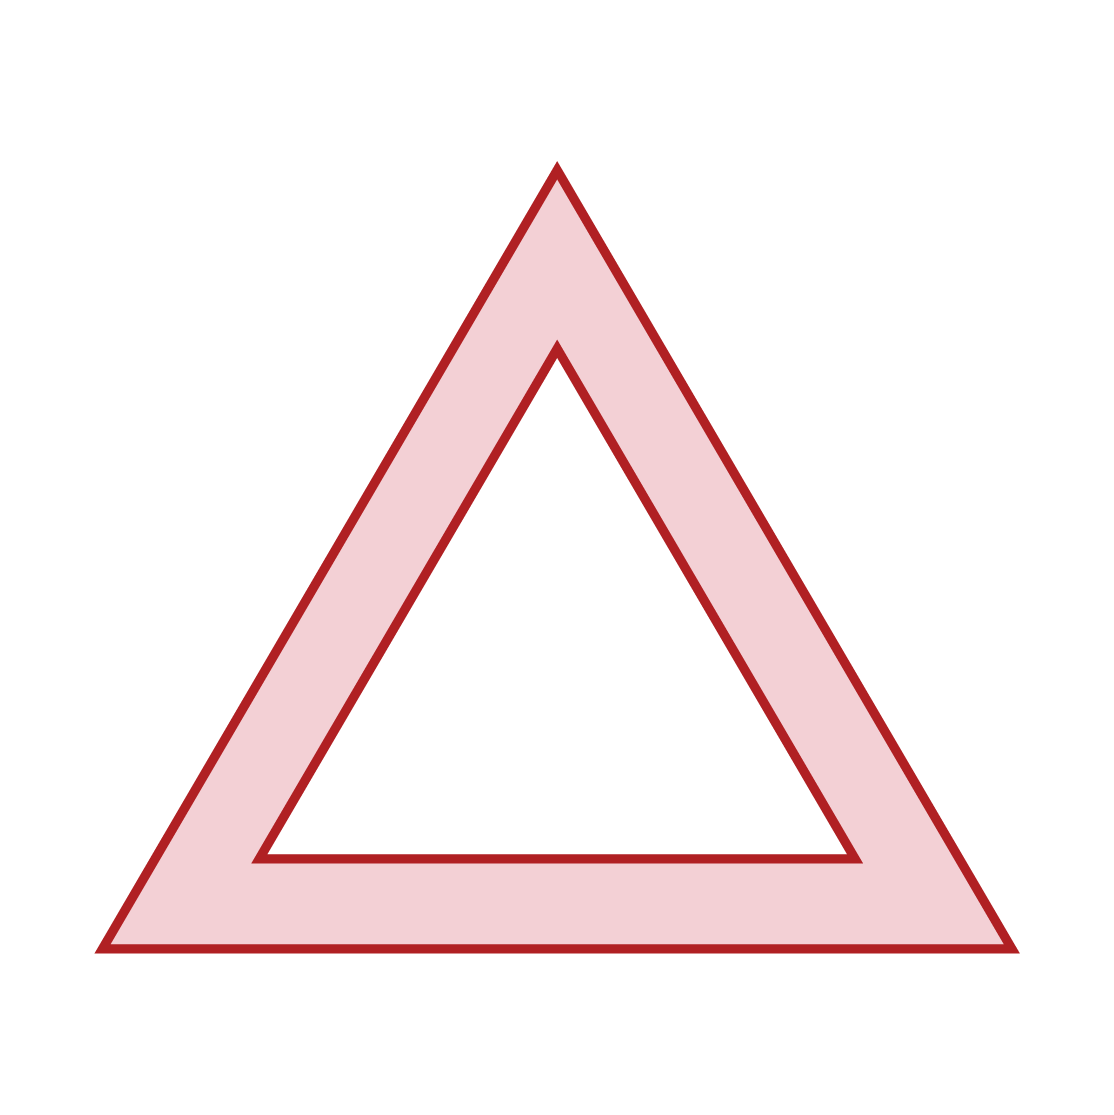 Illustration of a triangle